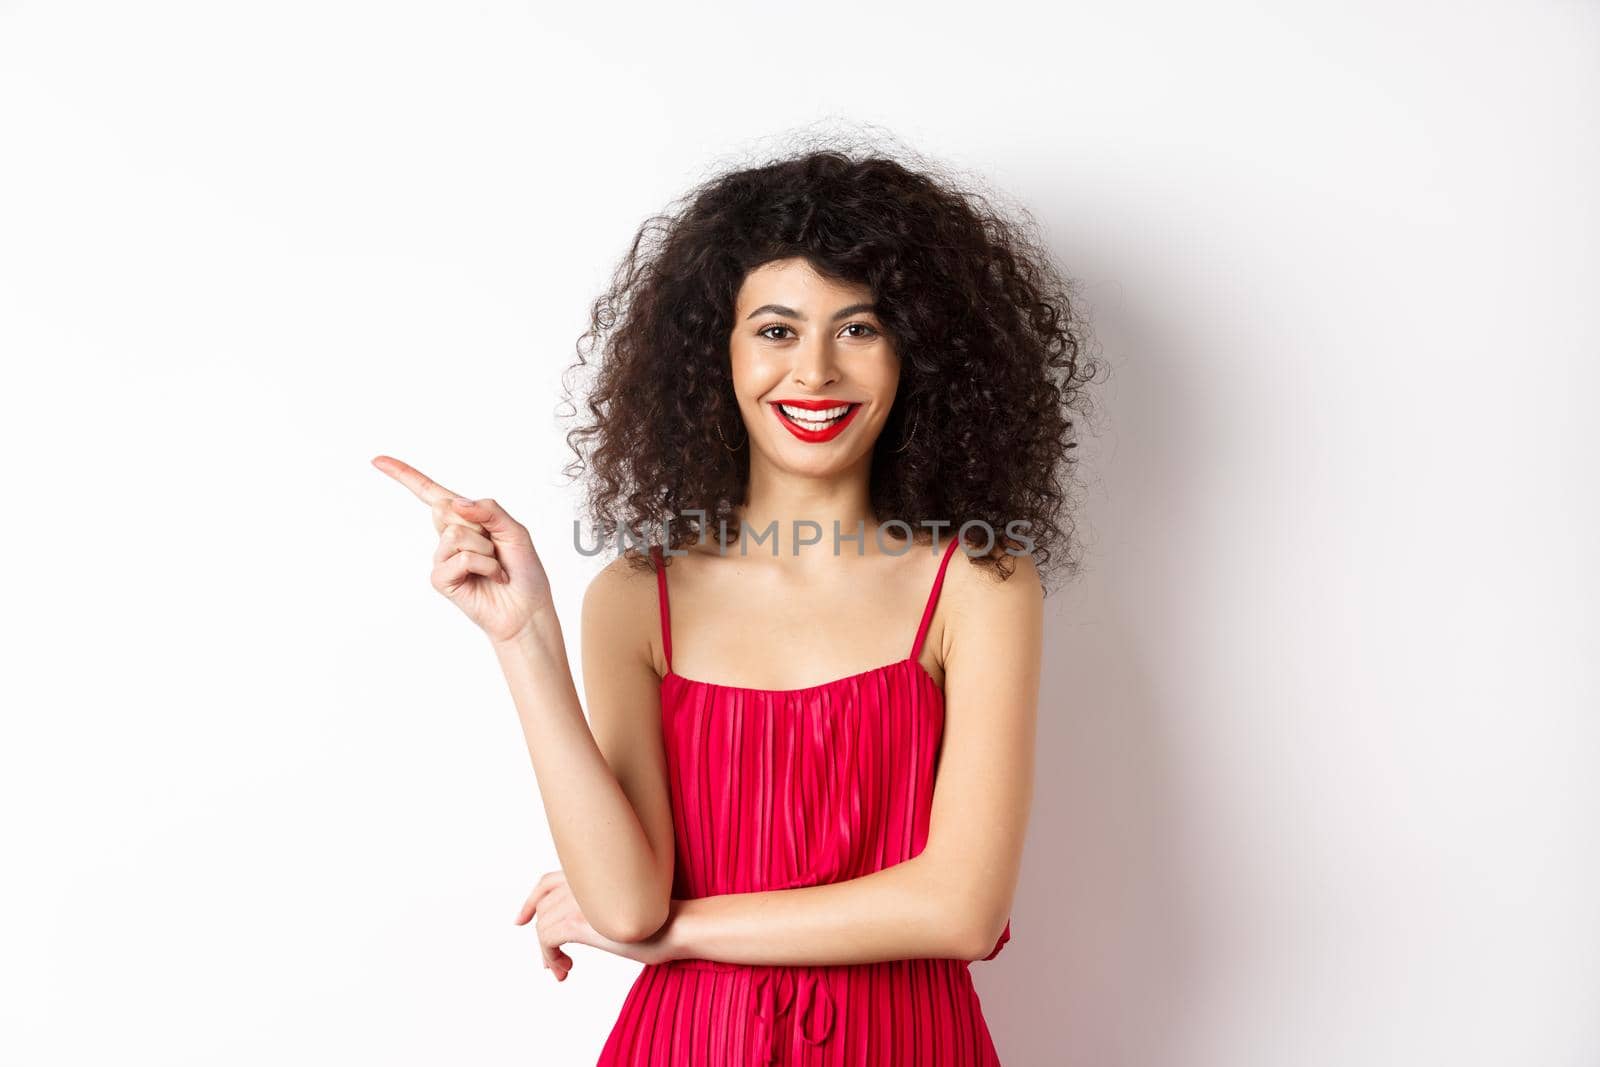 Beautiful happy woman with curly hairstyle, wearing festive dress, pointing finger left at logo and smiling, white background.